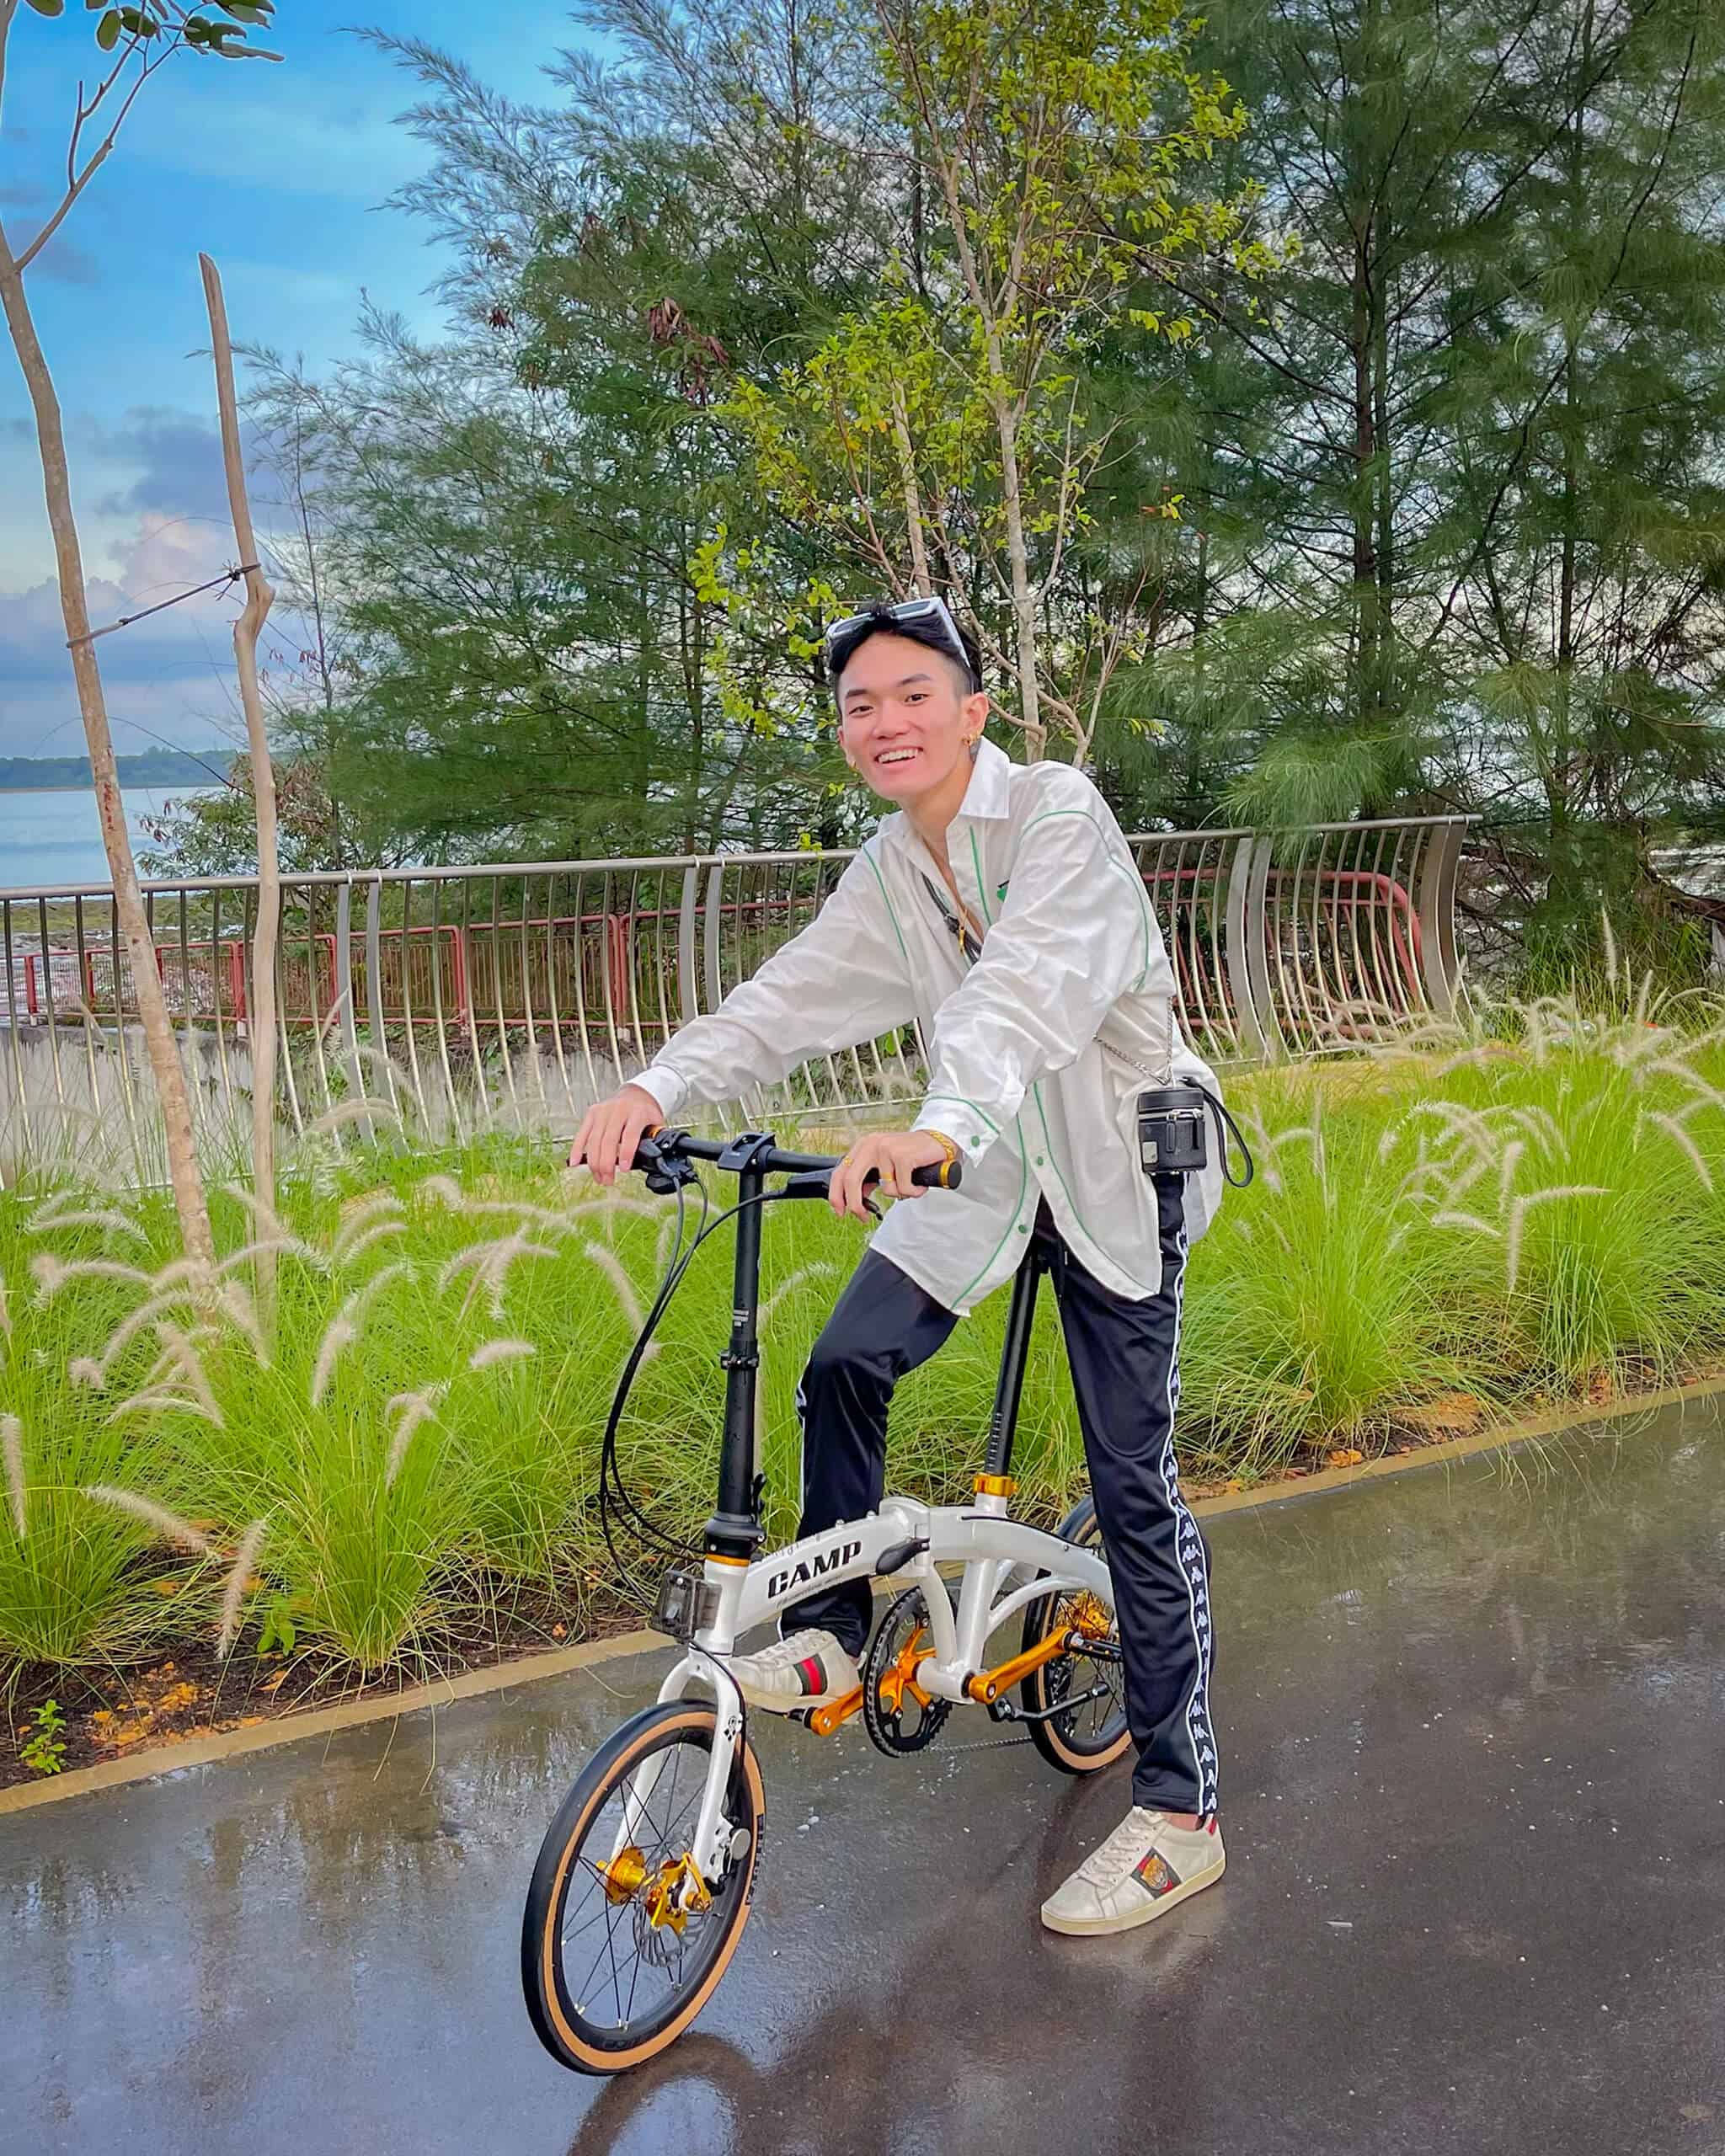 CAMP Chameleon Mini PEARL WHITE foldable bicycle with Jun Jie at Changi Bay PCN - Top 8 Cycling Routes On A Foldable Bicycle In Singapore